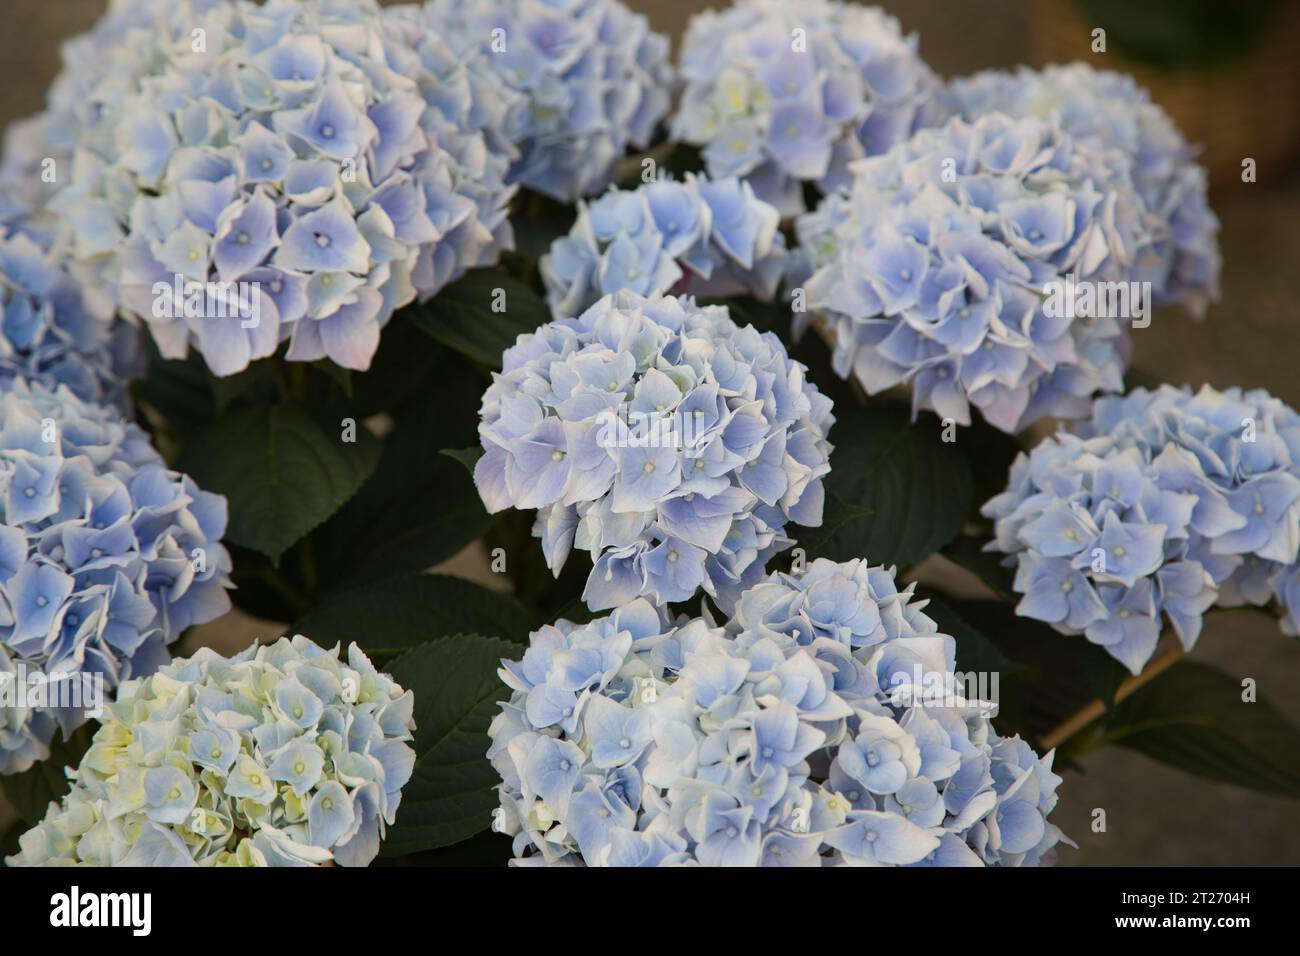 A closeup of a beautiful blue hydrangea macrophylla flower, showing its delicate petals and clusters of tiny florets. It is also known as bigleaf hydr Stock Photo